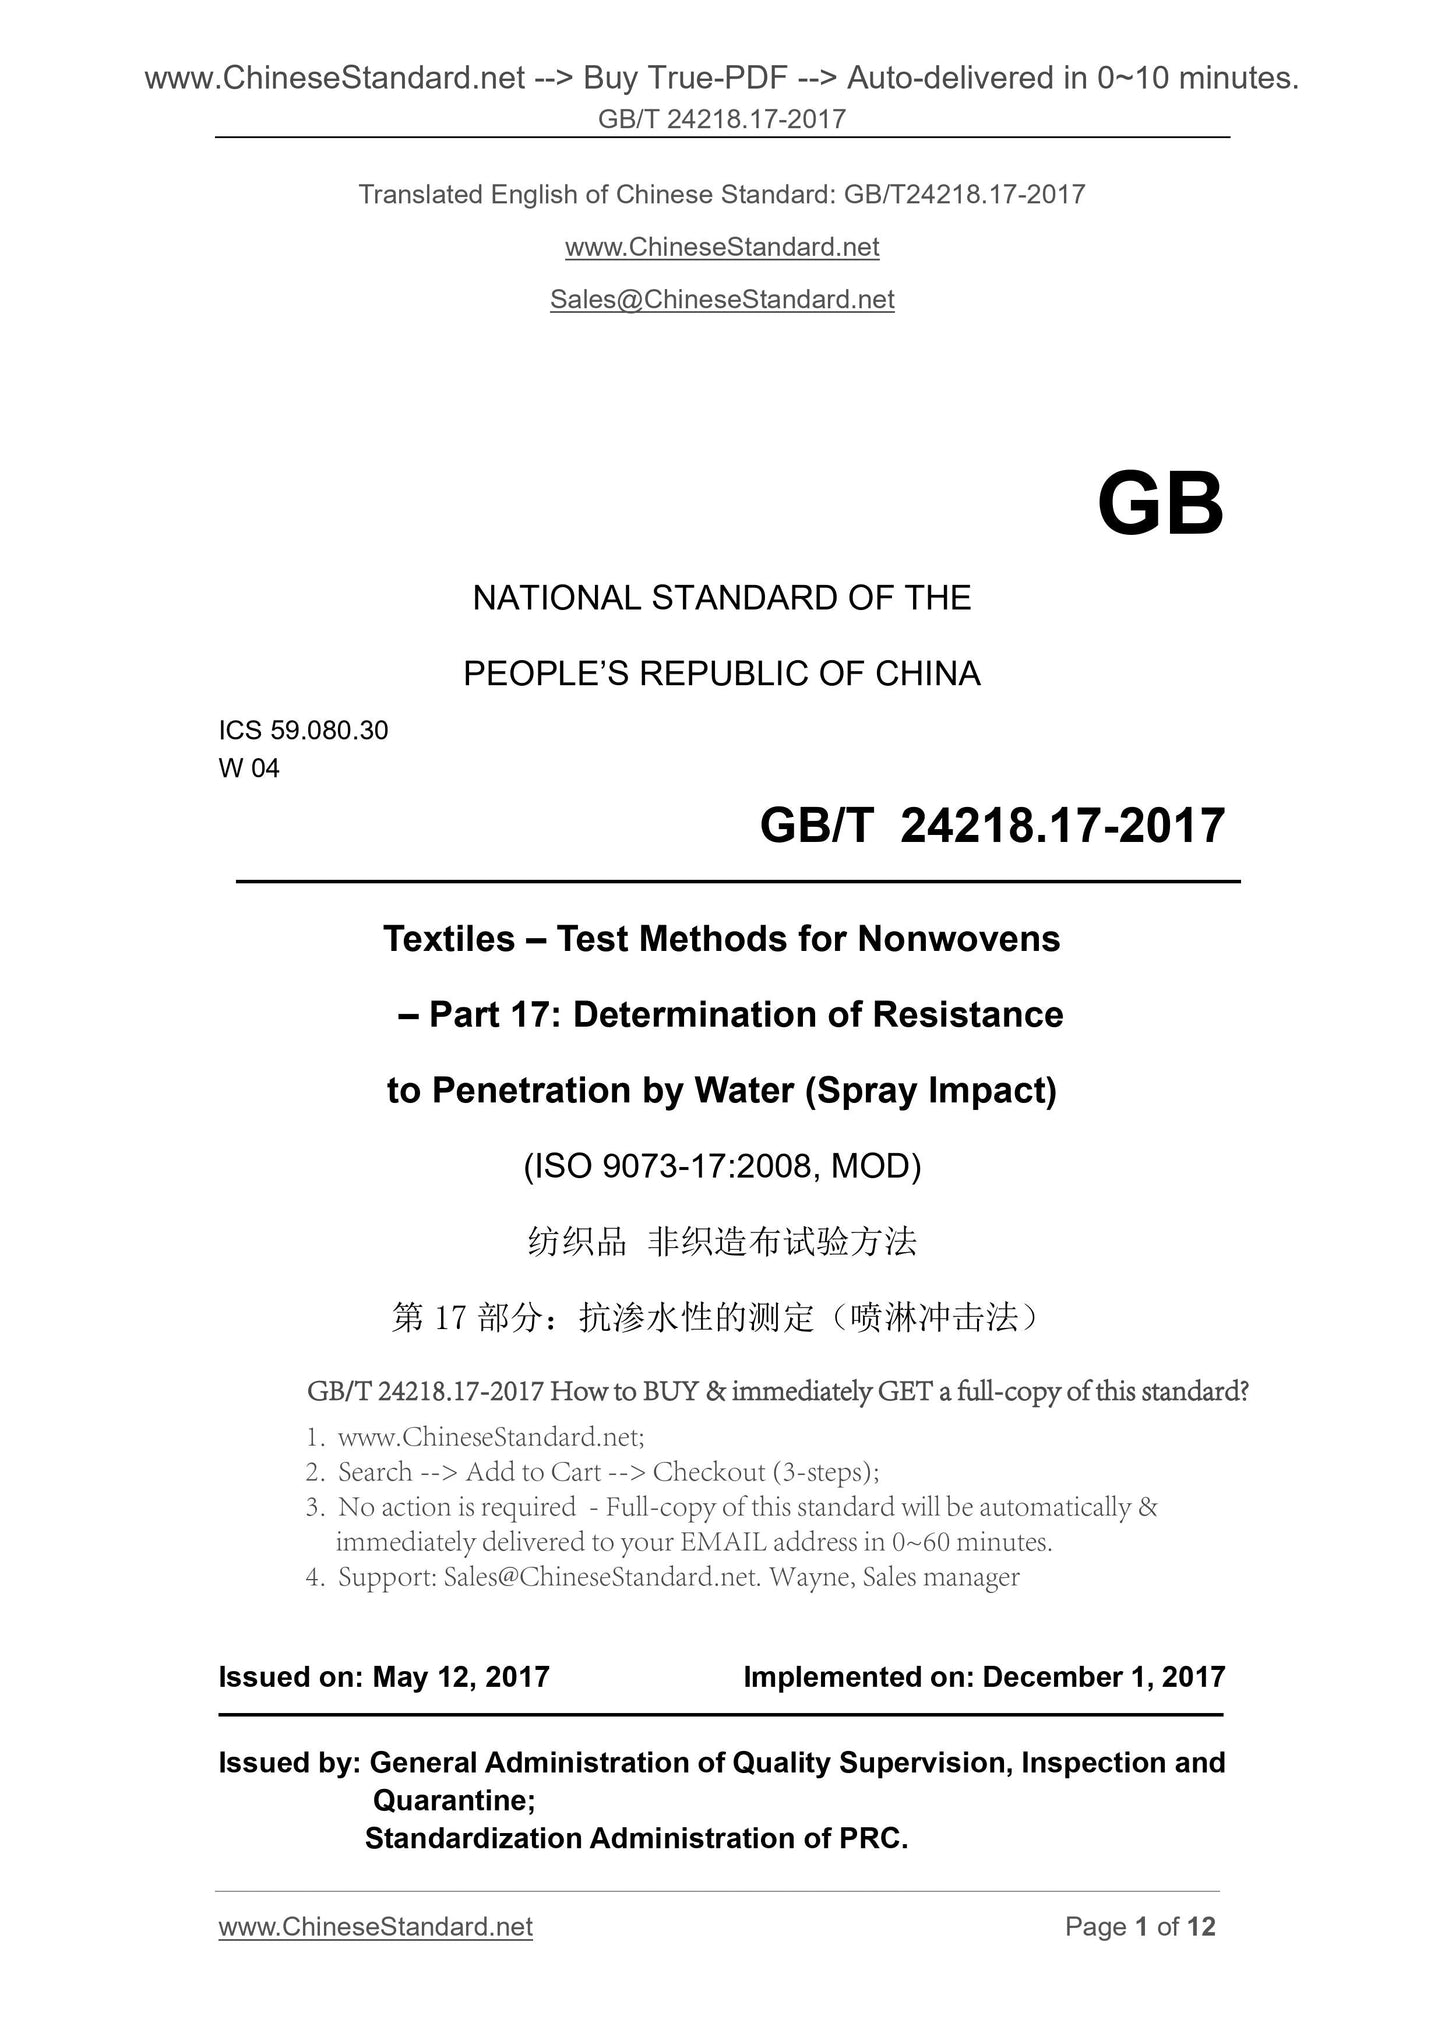 GB/T 24218.17-2017 Page 1